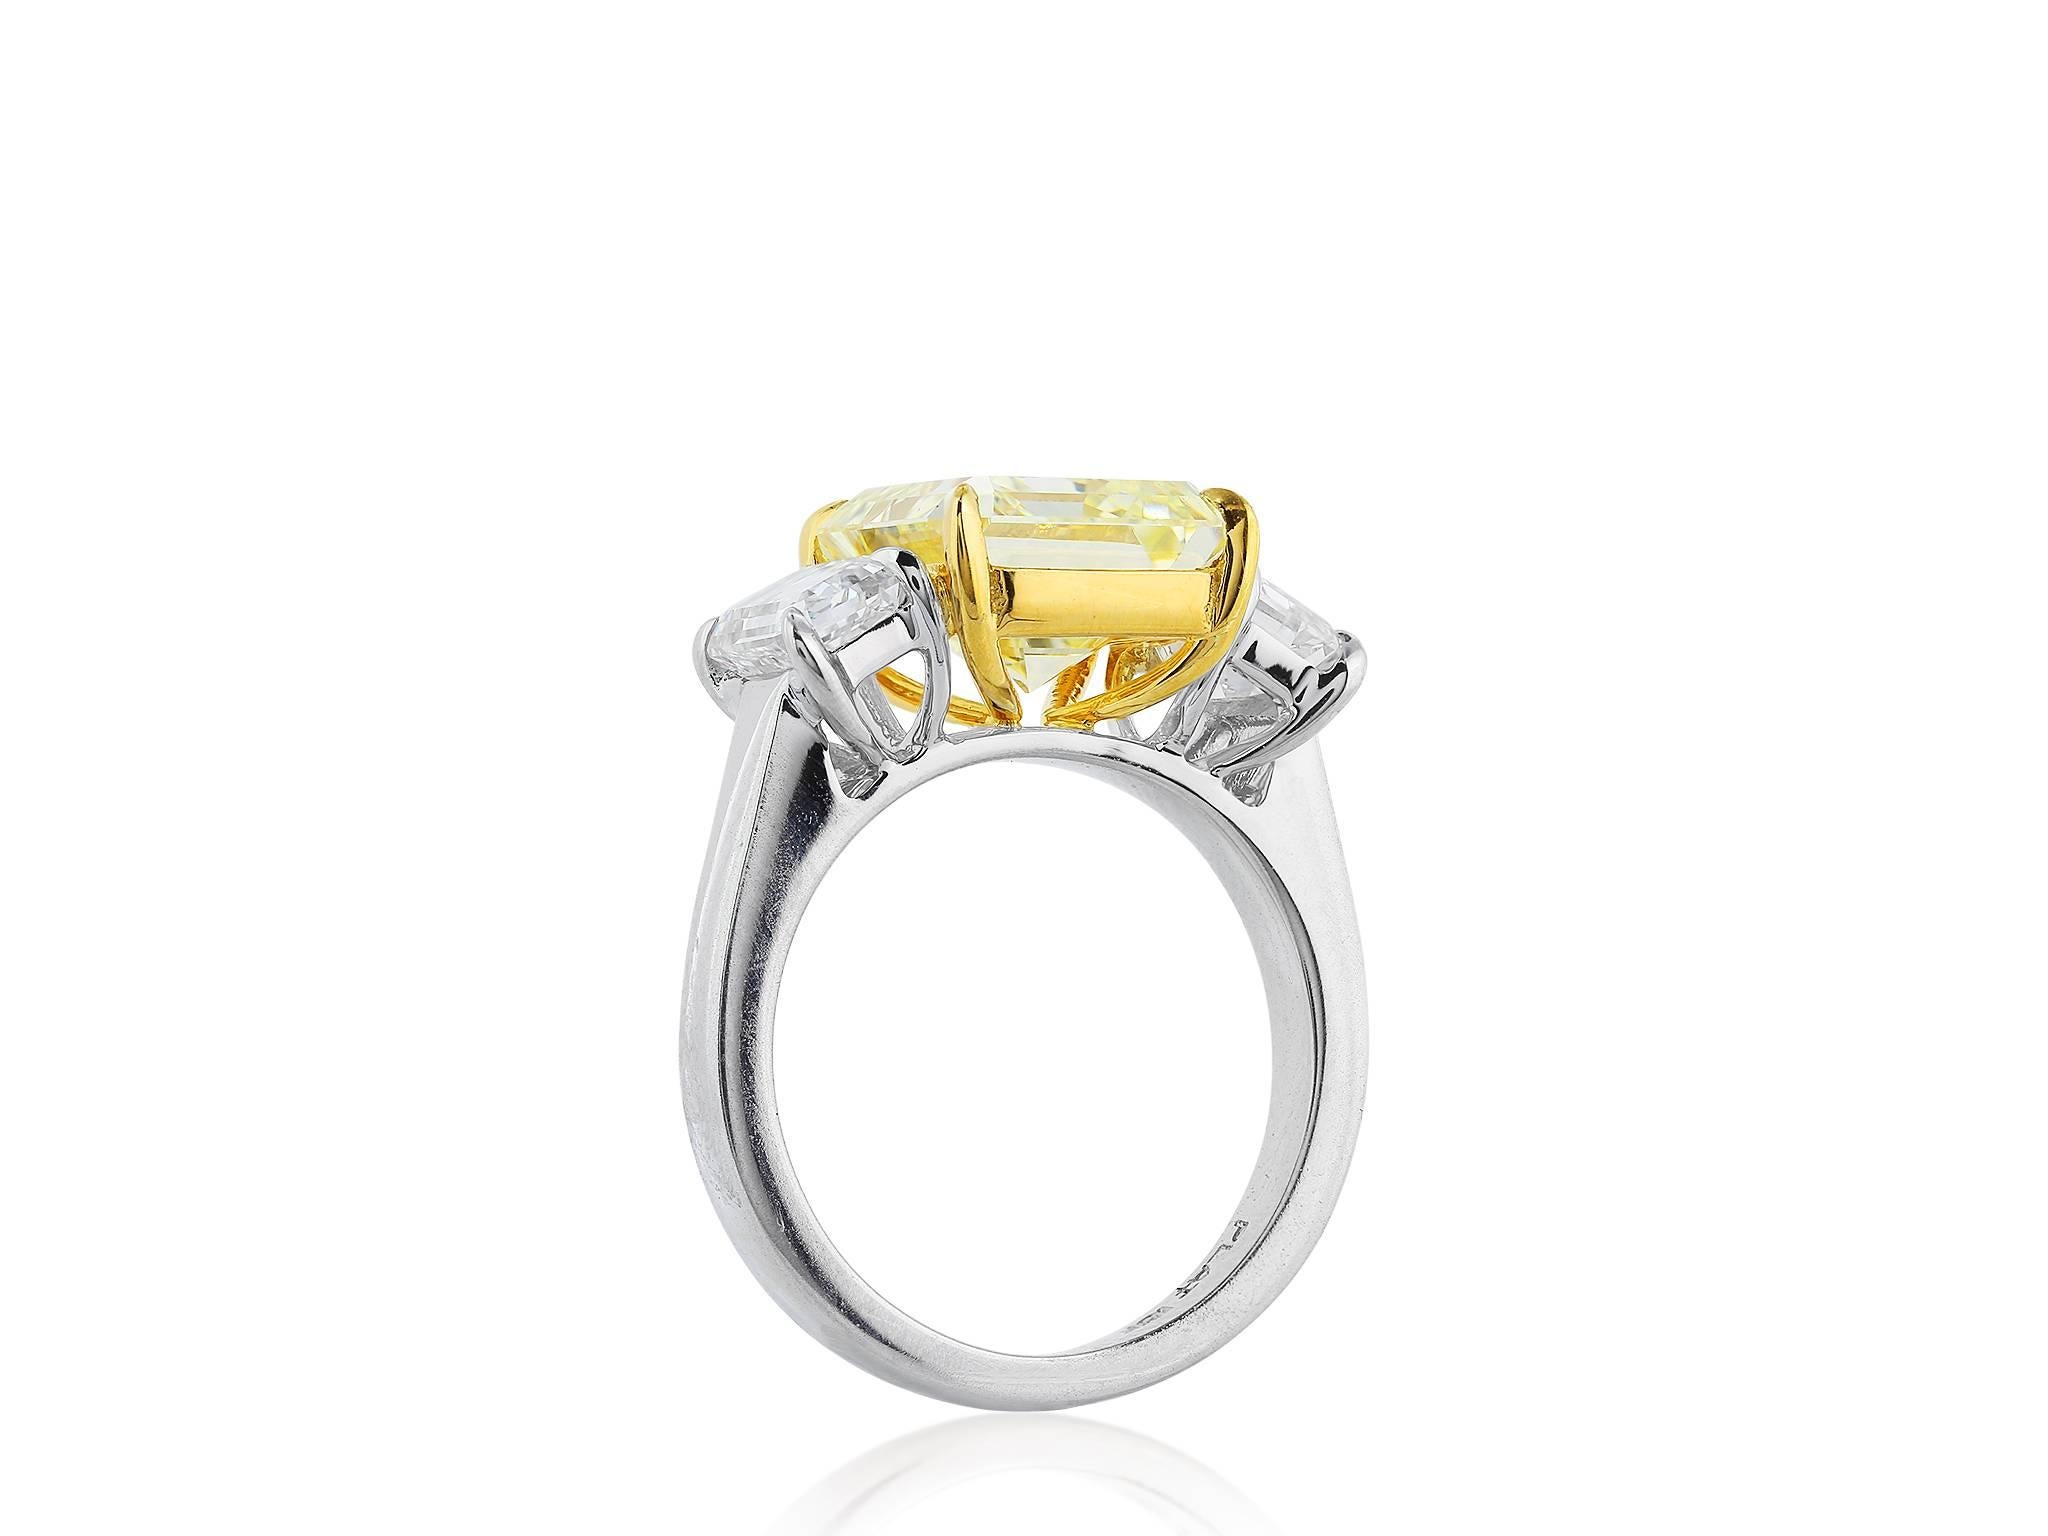 Platinum and 18 karat yellow gold consisting of 1 emerald cut canary diamond weighing 5.28 carats having a color and clarity of FY/SI1 with GIA certificate #2165195114, the center stone is flanked by 2 emerald cut diamonds having a total weight of